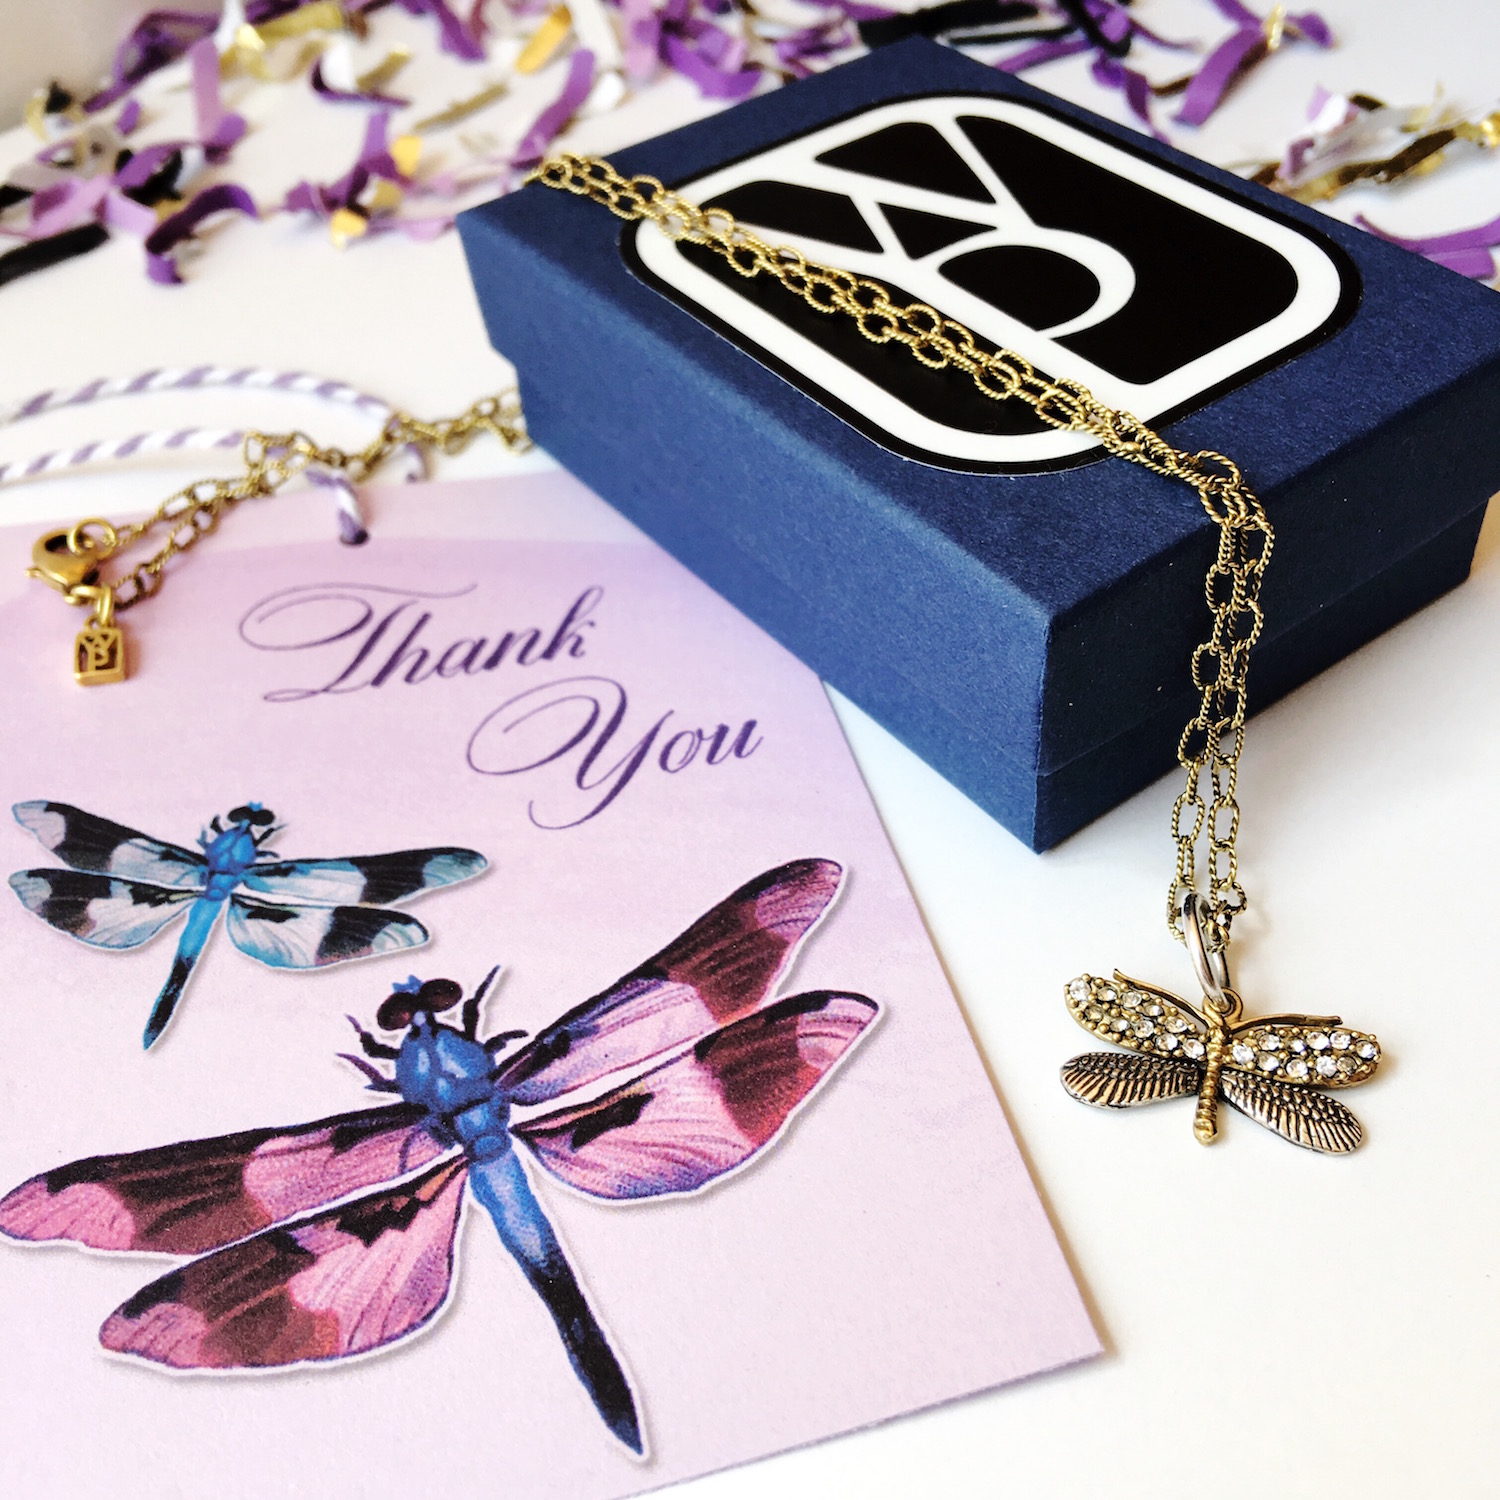 Dragonfly Gift Ideas and Free Gift Tags